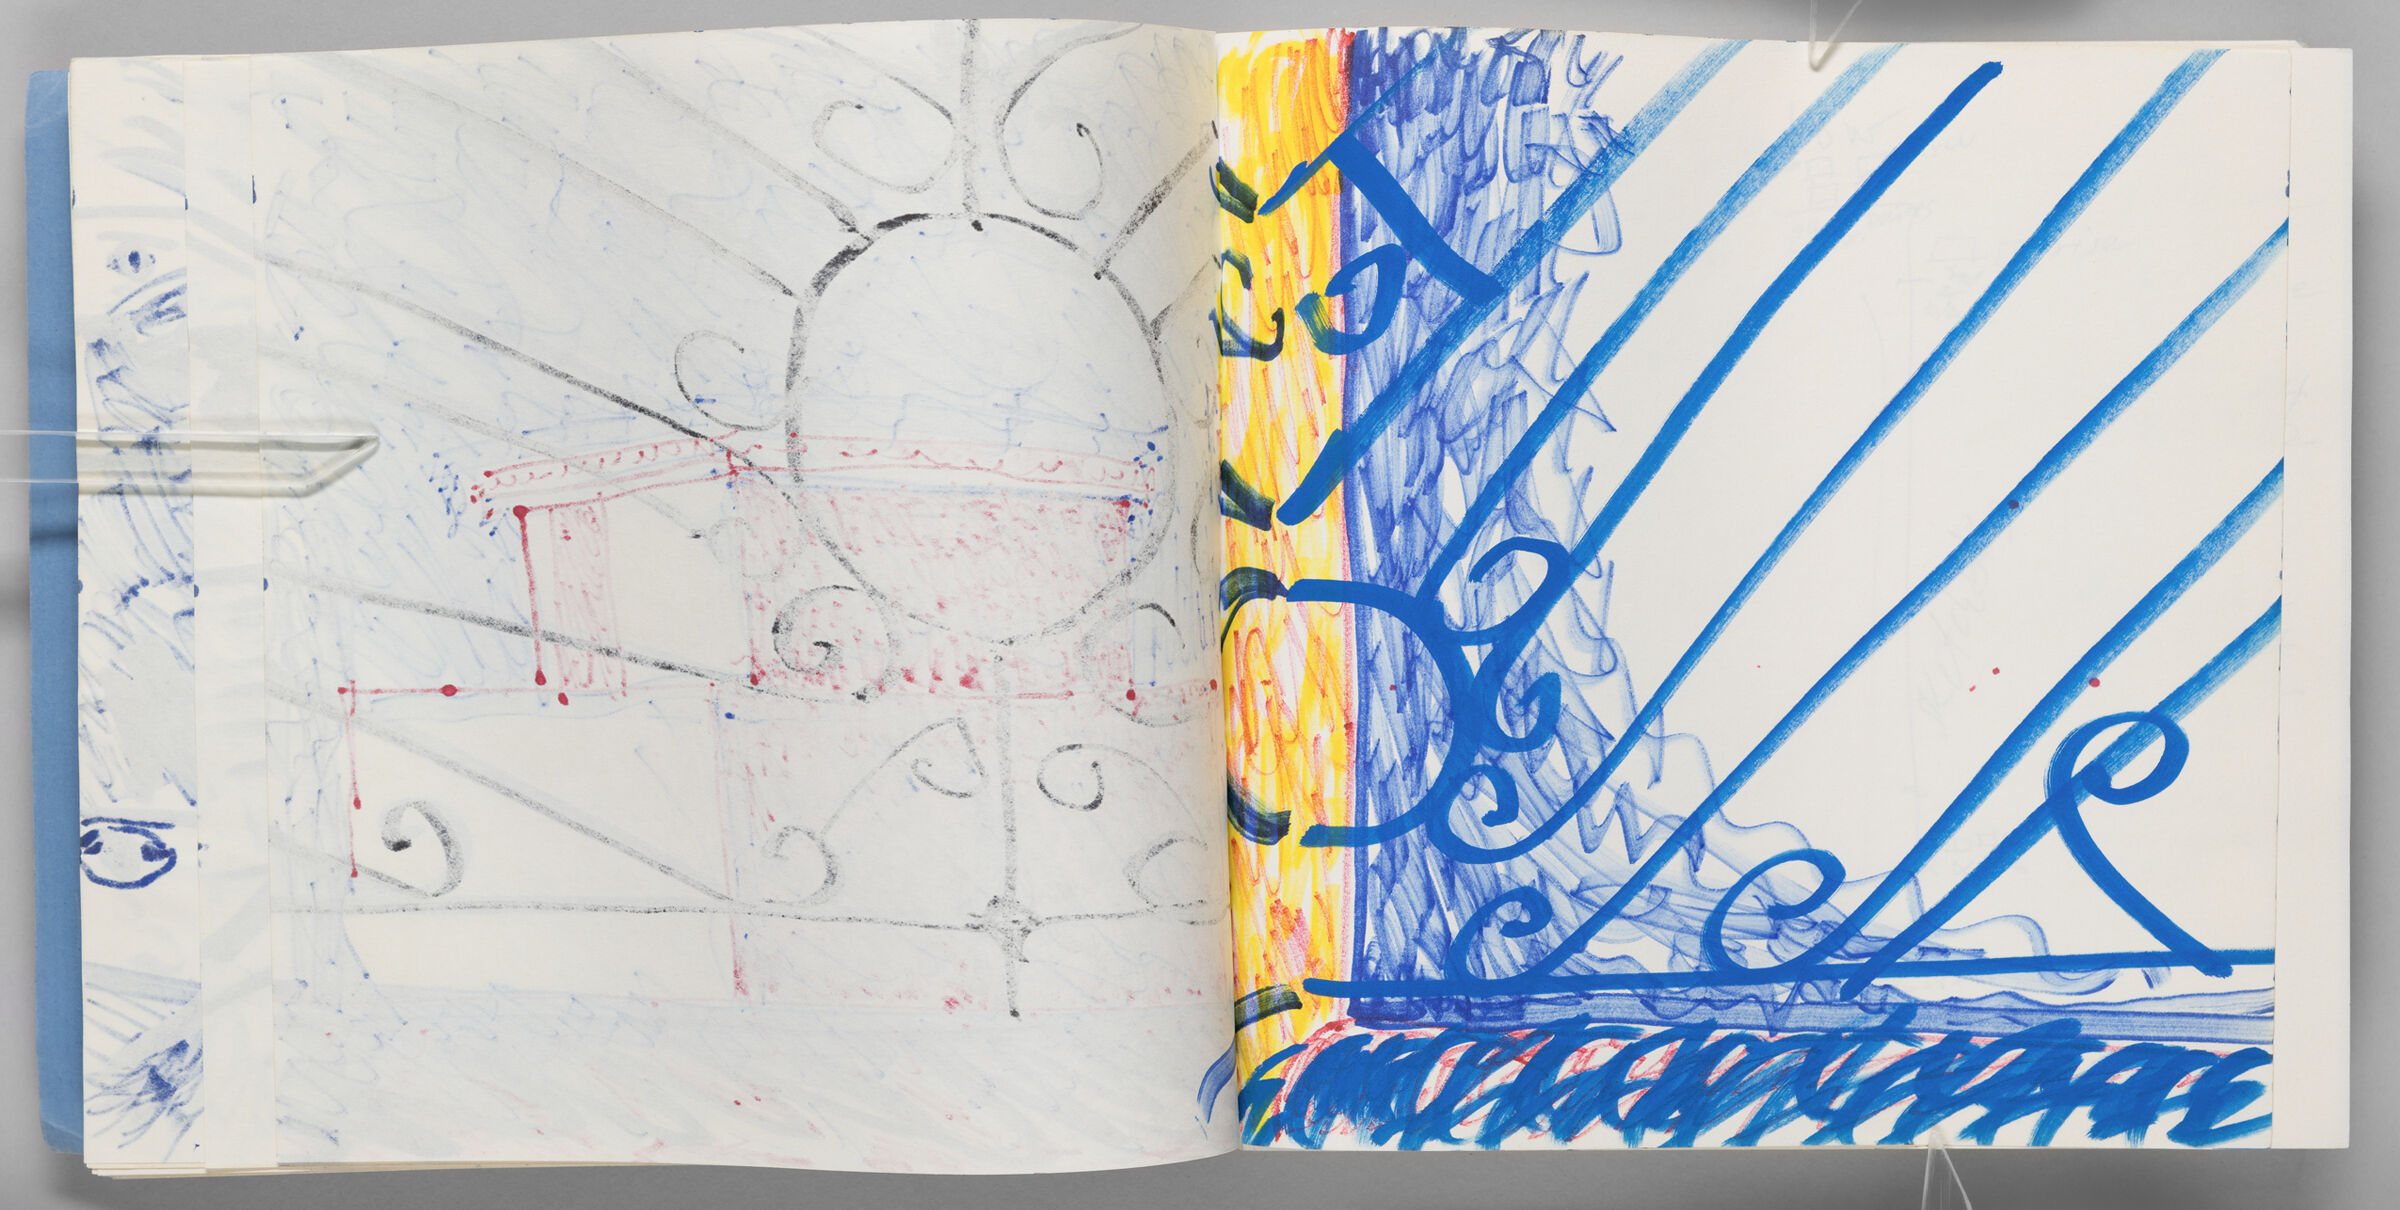 Untitled (Bleed-Through Of Previous Page, Left Page); Untitled (View Through Railing, Right Page)
